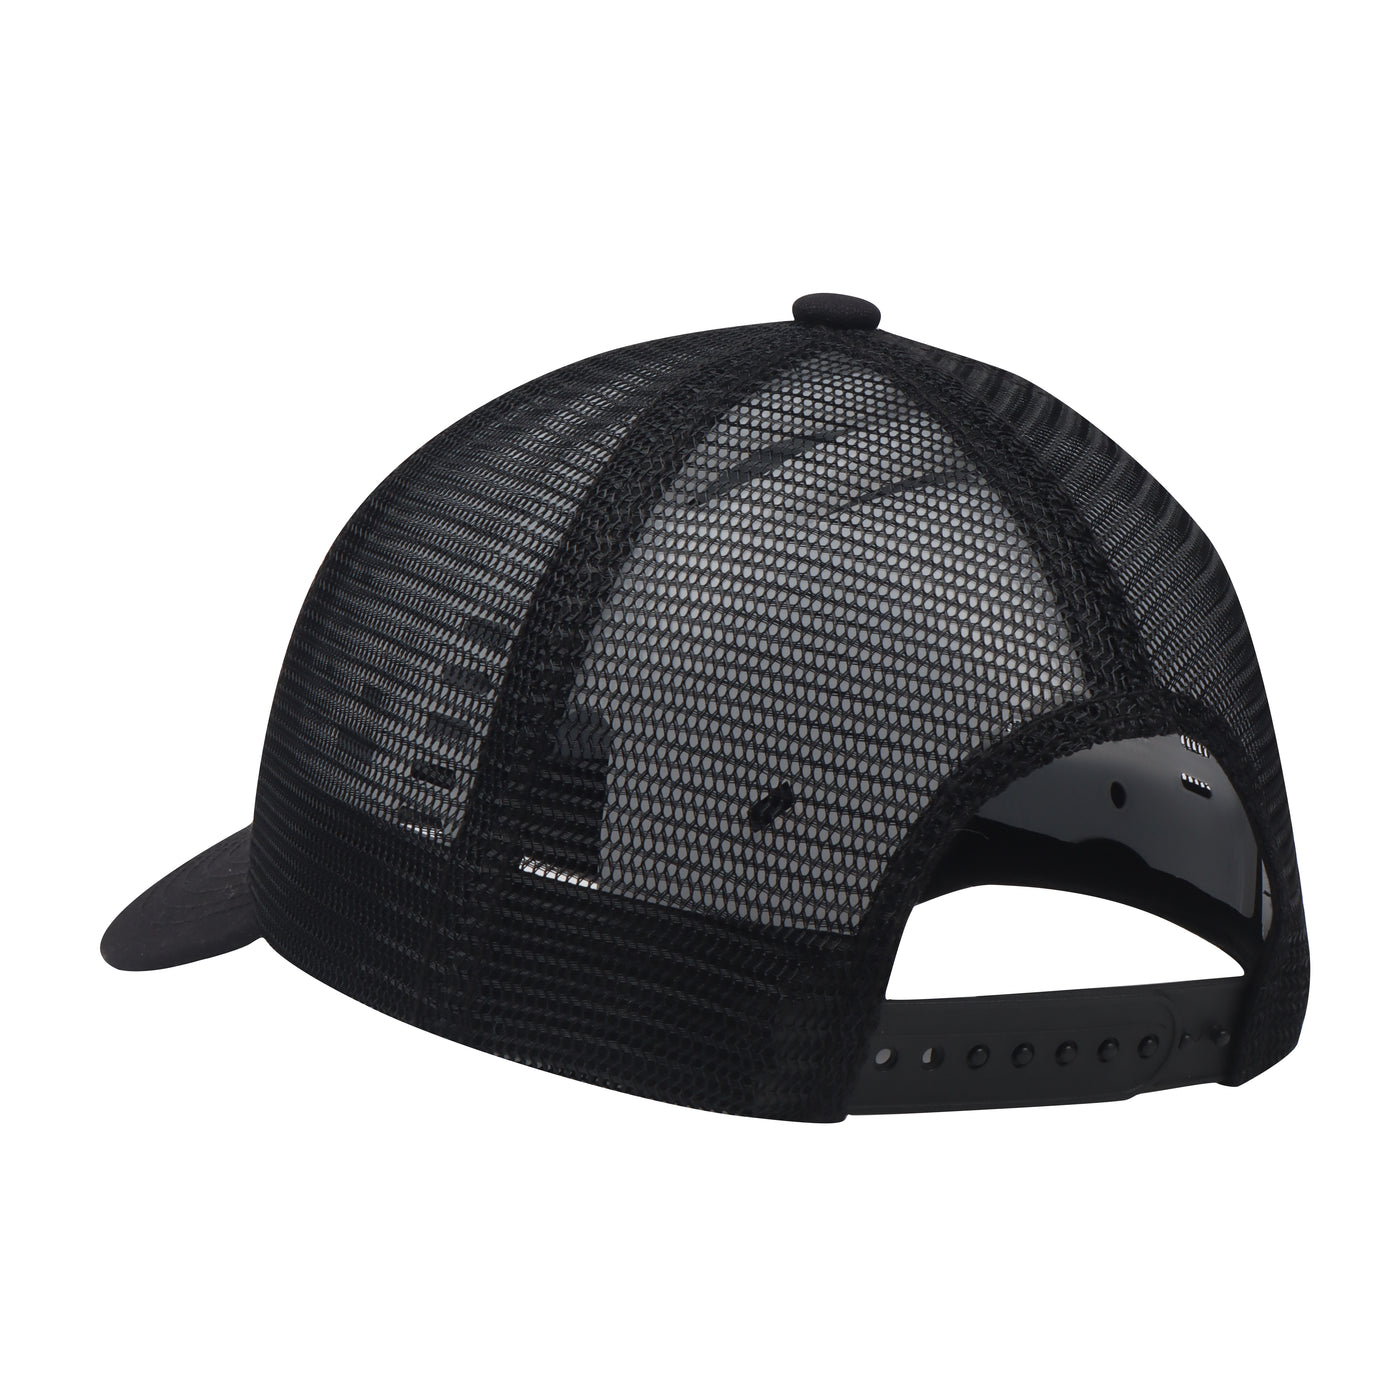 Hatphile: American Flag Dog Dad Performance Snapback Hats for Patriotic Dog Dads with Laser-Perforated Side & Rear Panels for Breathability Trucker Hat